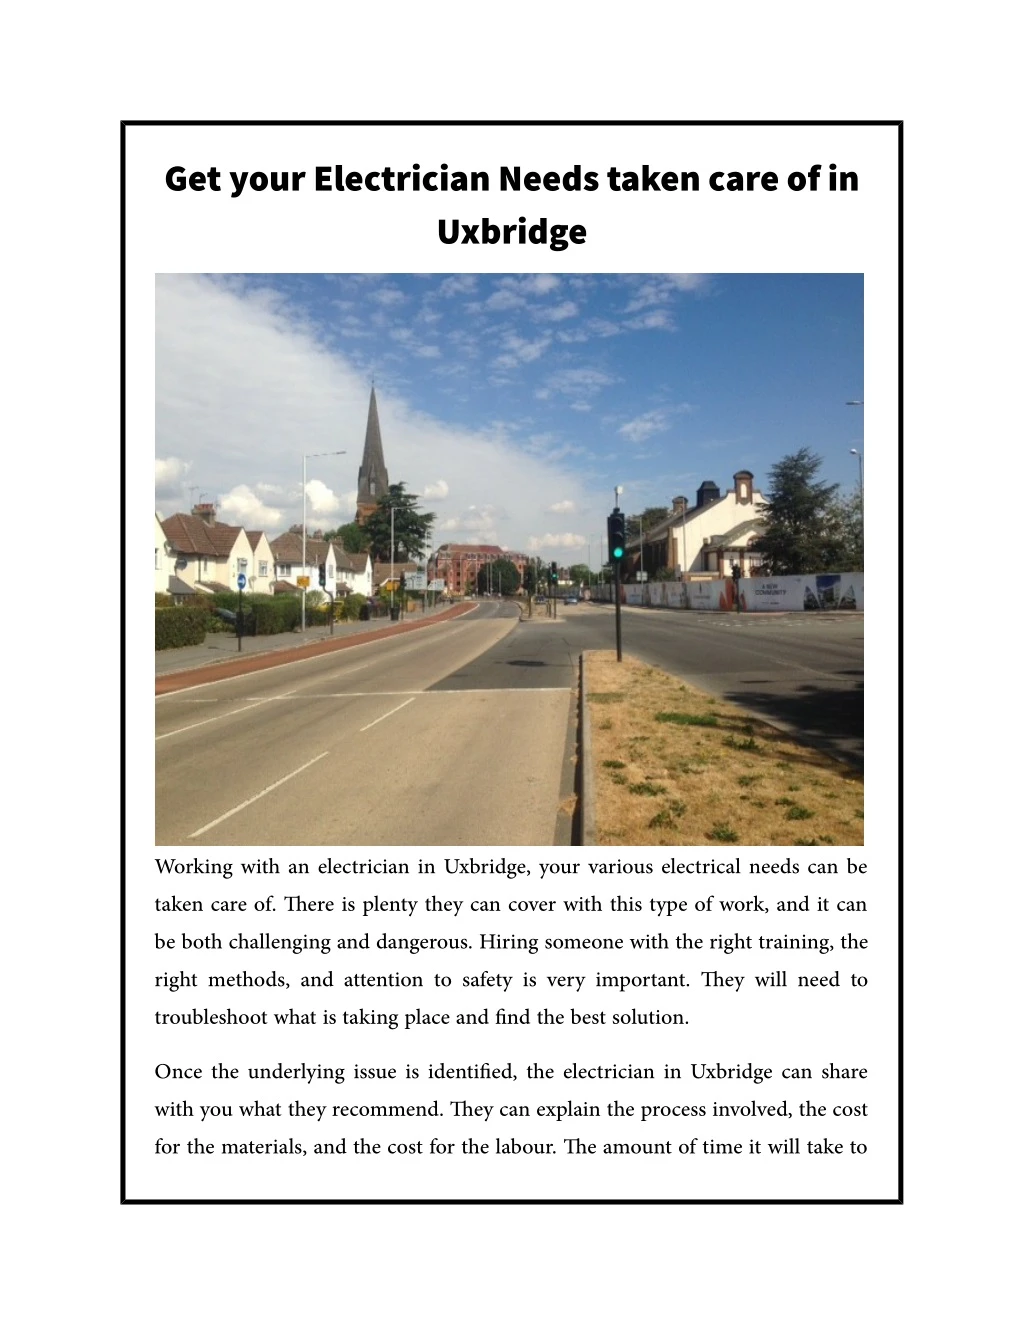 get your electrician needs taken care